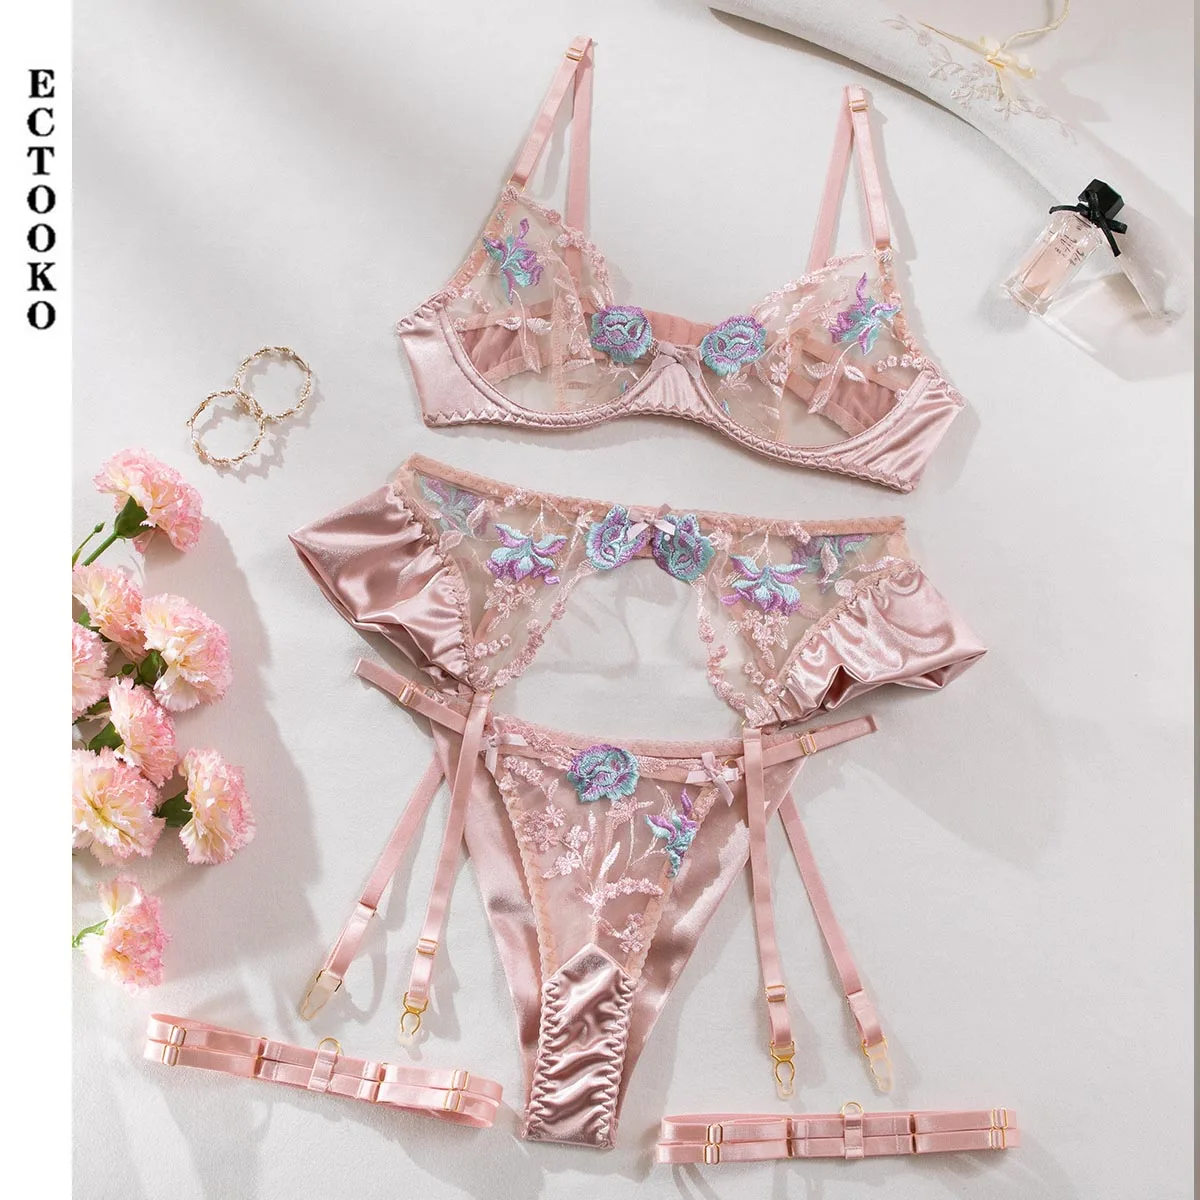 

ECTOOKO Transparent Lace Sexy Fantasy Underwear Attractive Pushup Bra Outfits Ruffle Erotic Lingerie Floral Intimate Set